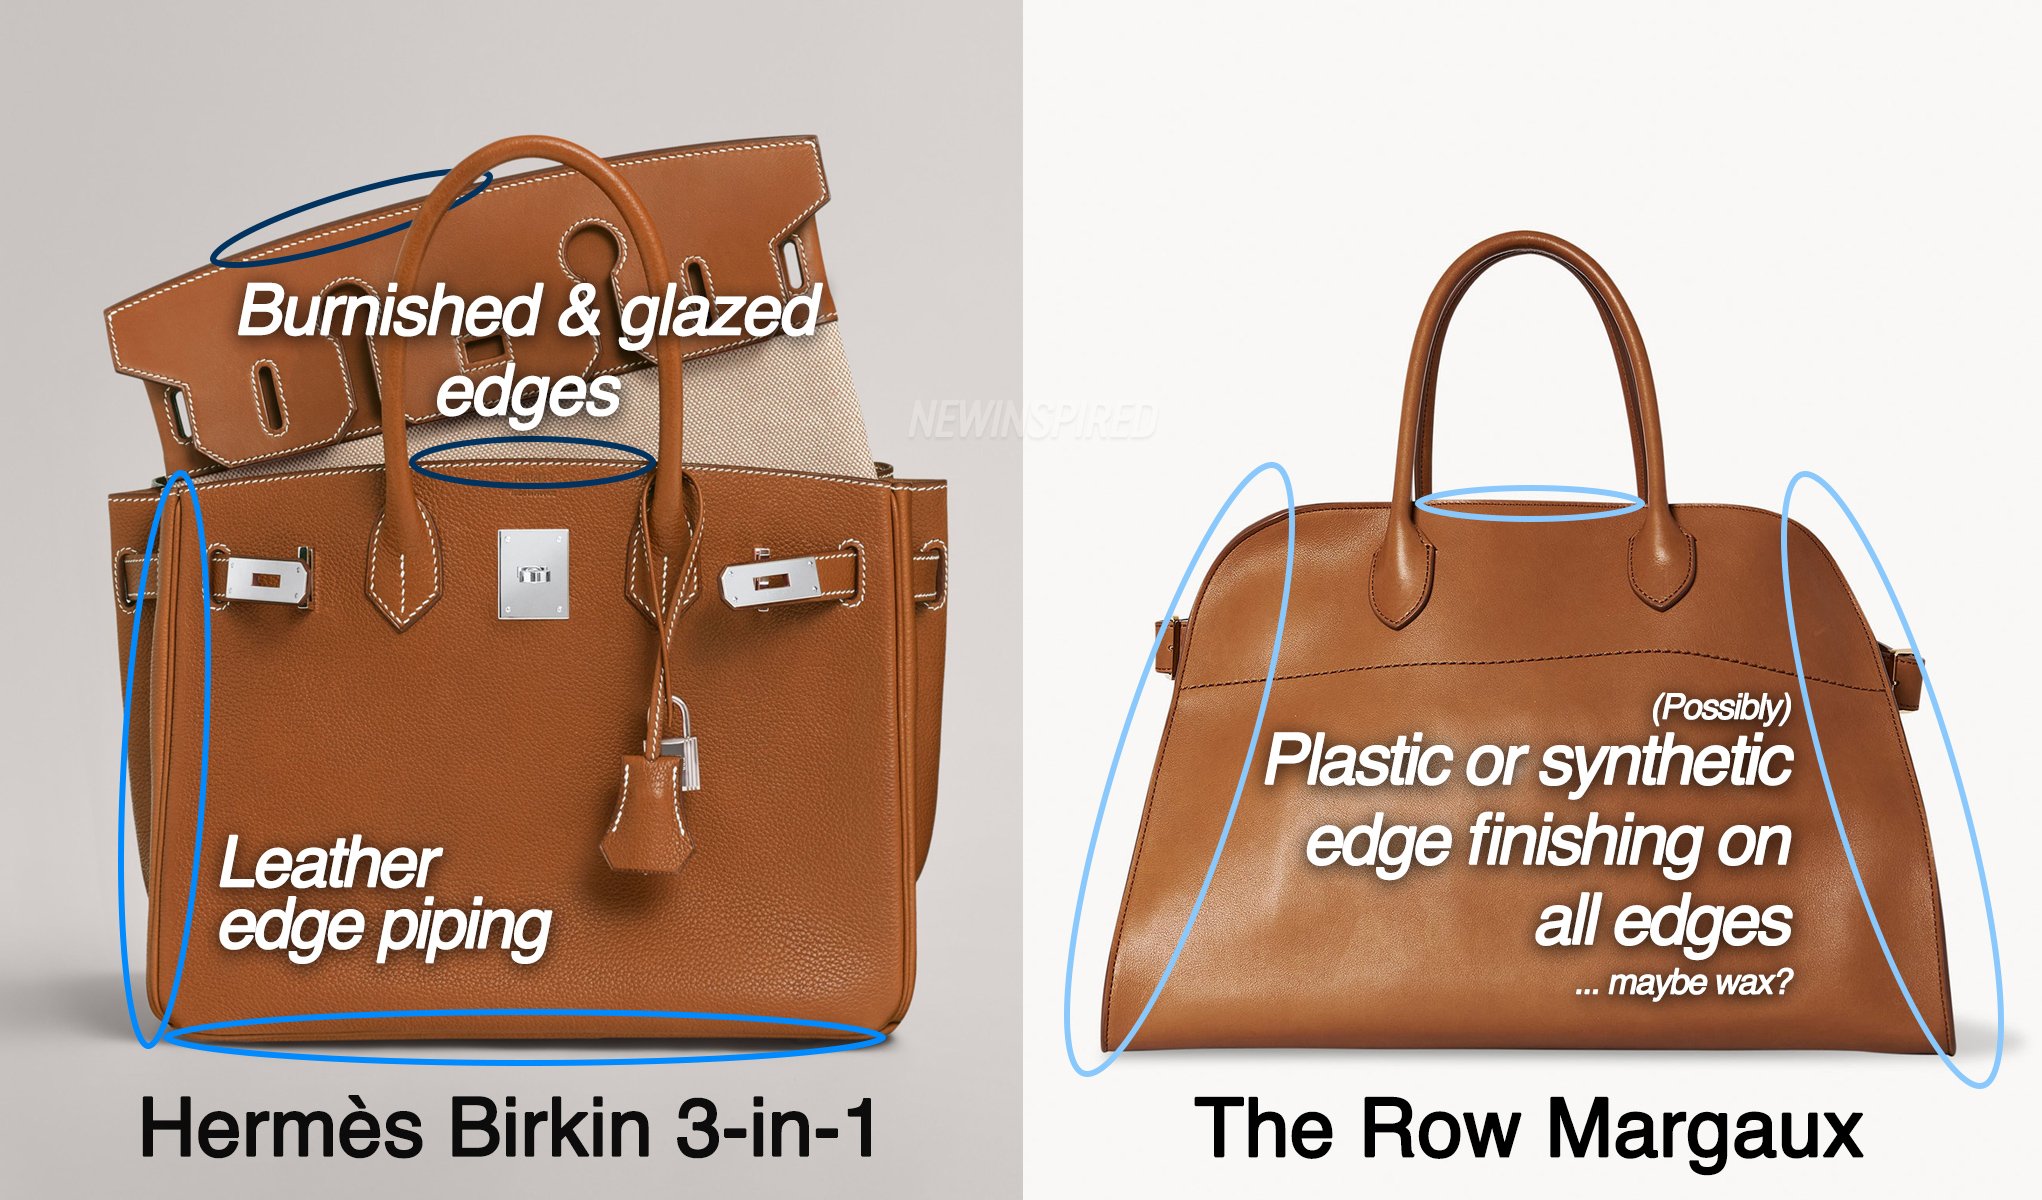 Showing the differences in the Hermès Birkin and The Row Margaux bag